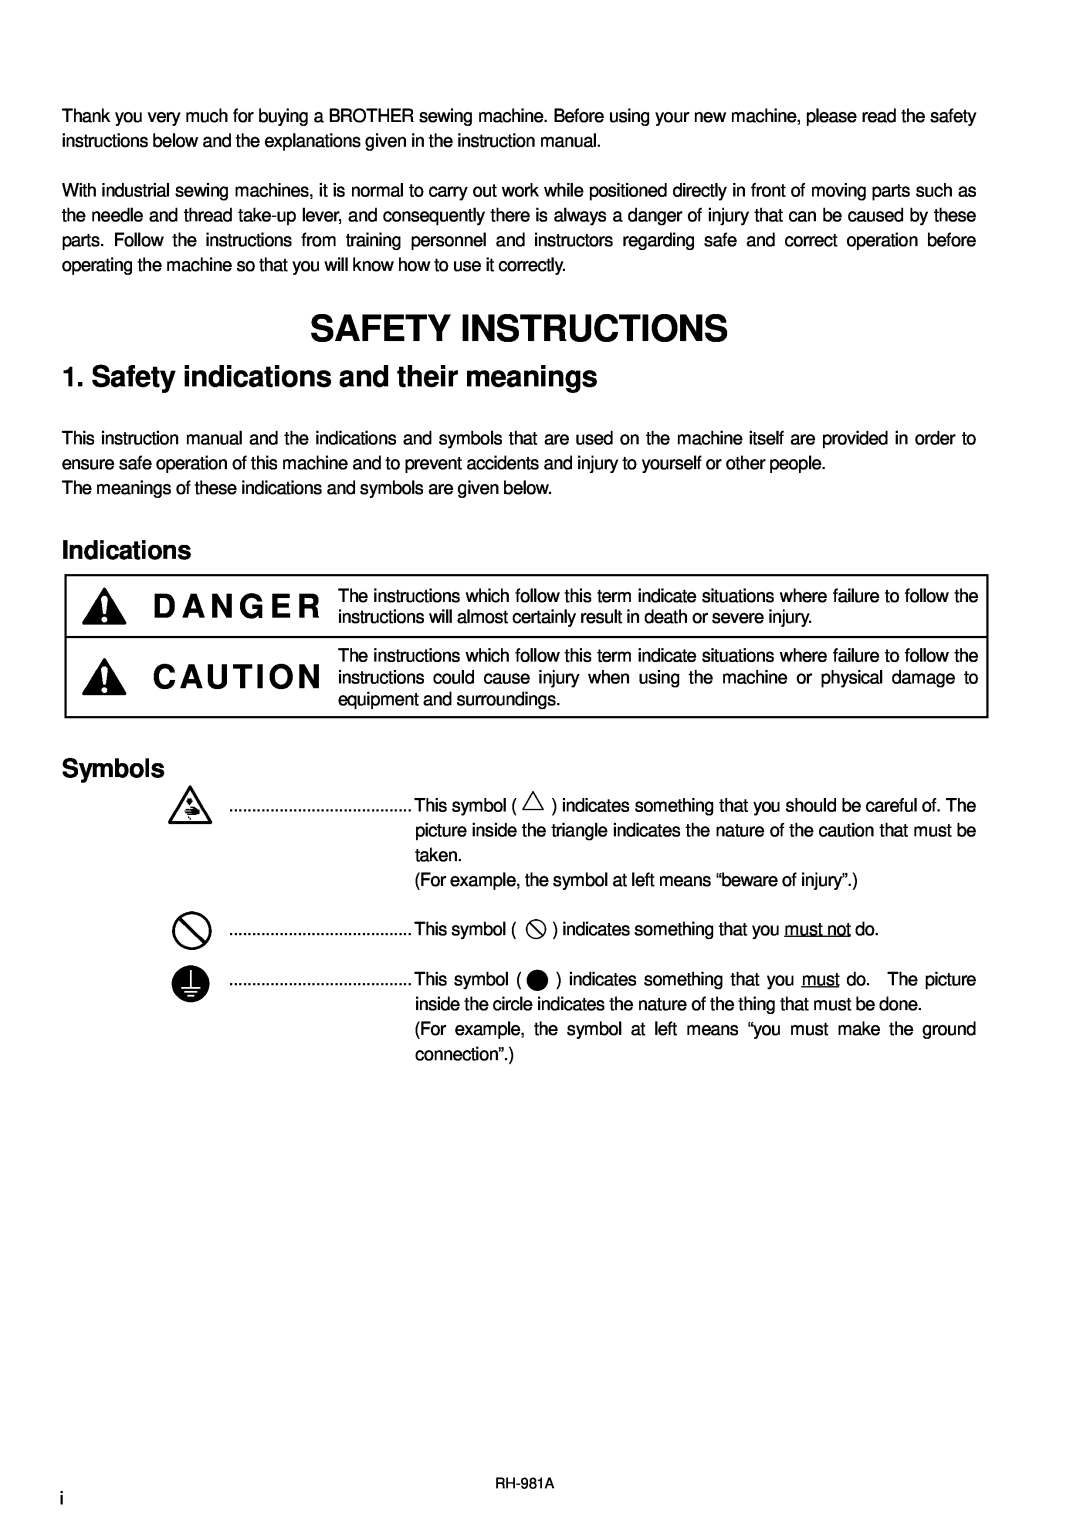 Brother rh-918a manual Safety Instructions, Safety indications and their meanings, Indications, Symbols 